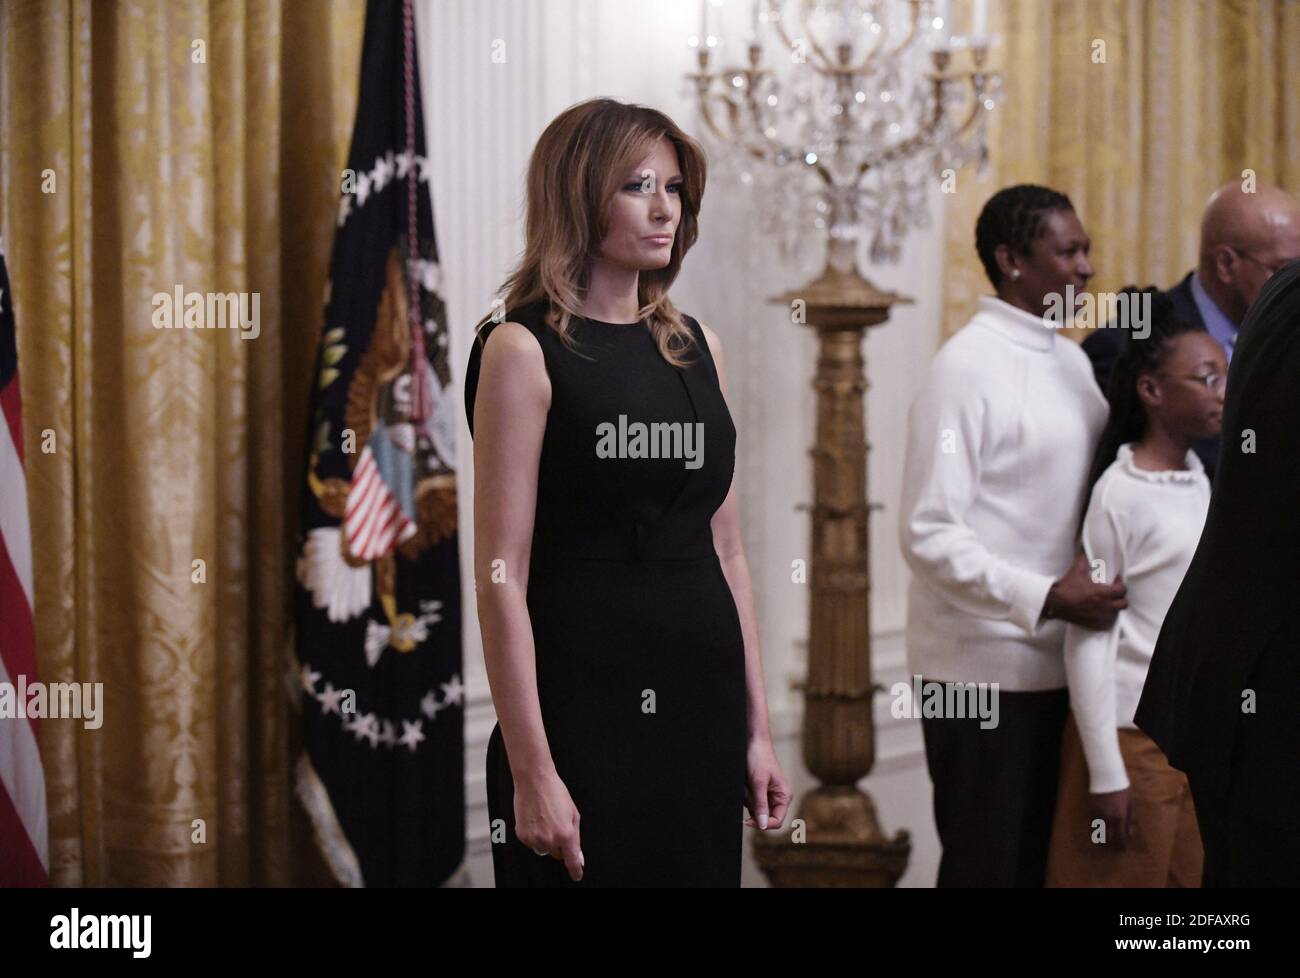 File photo - First lady Melania Trump looks on during a reception for National African American History Month, on February 21, 2019, in Washington, DC. A new, scrupulously reported biography by Washington Post reporter Mary Jordan argues that the first lady is not a pawn but a player, an accessory in the second as much as the first sense, and a woman able to get what she wants from one of the most powerful and transparently vain men in the world. The book is called The Art of Her Deal. Photo by Olivier Douliery/ABACAPRESS.COM Stock Photo